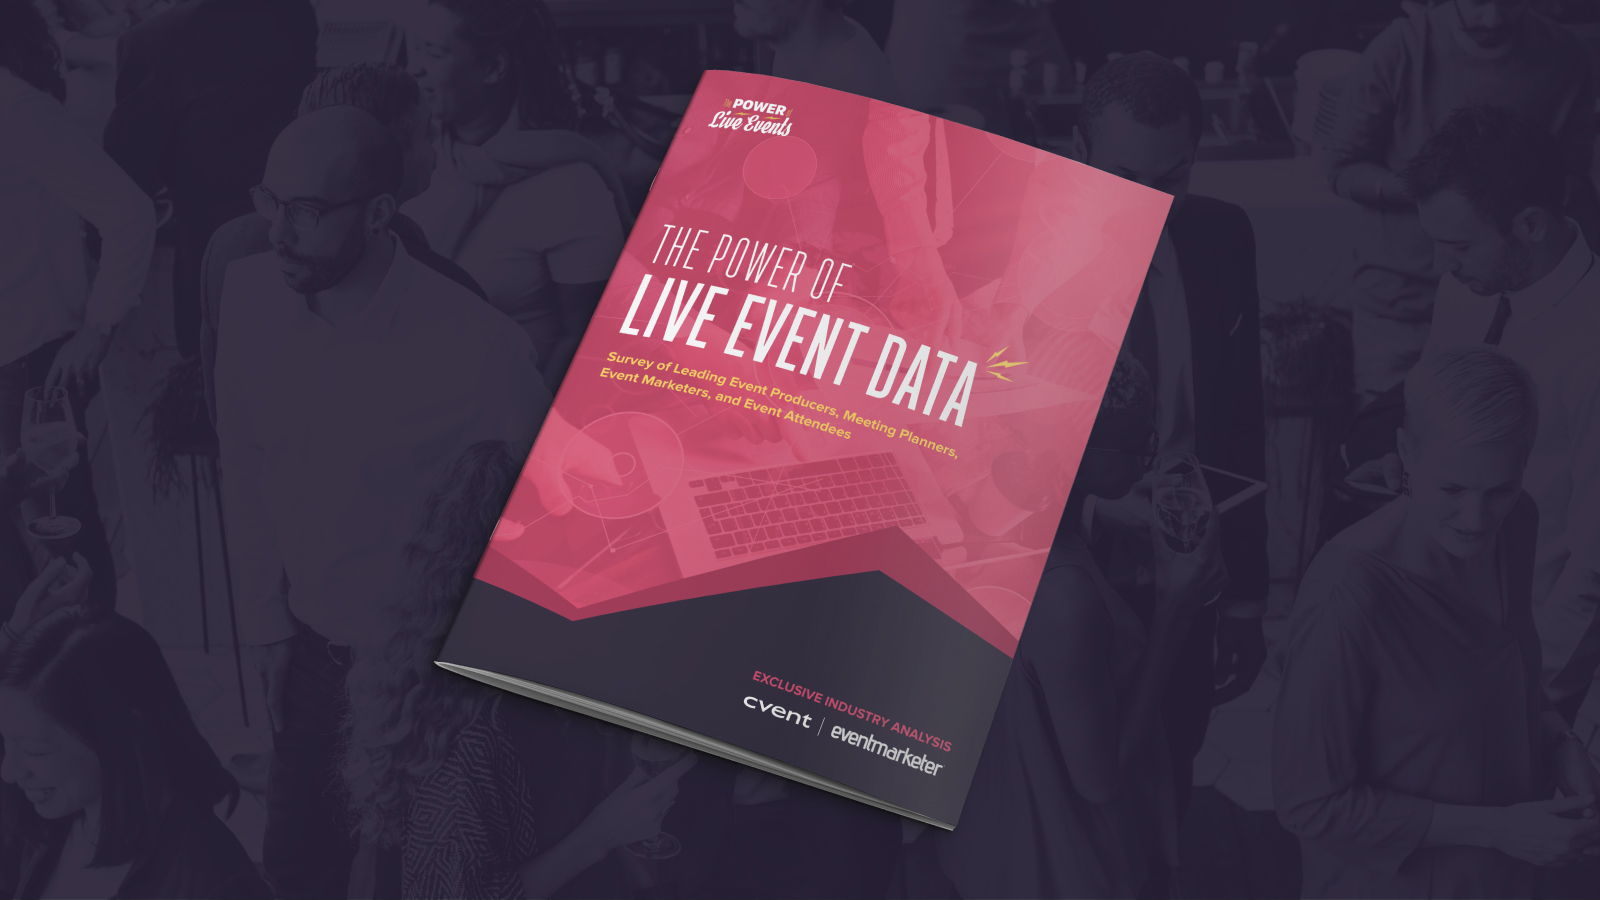 The Power of Live Event Data